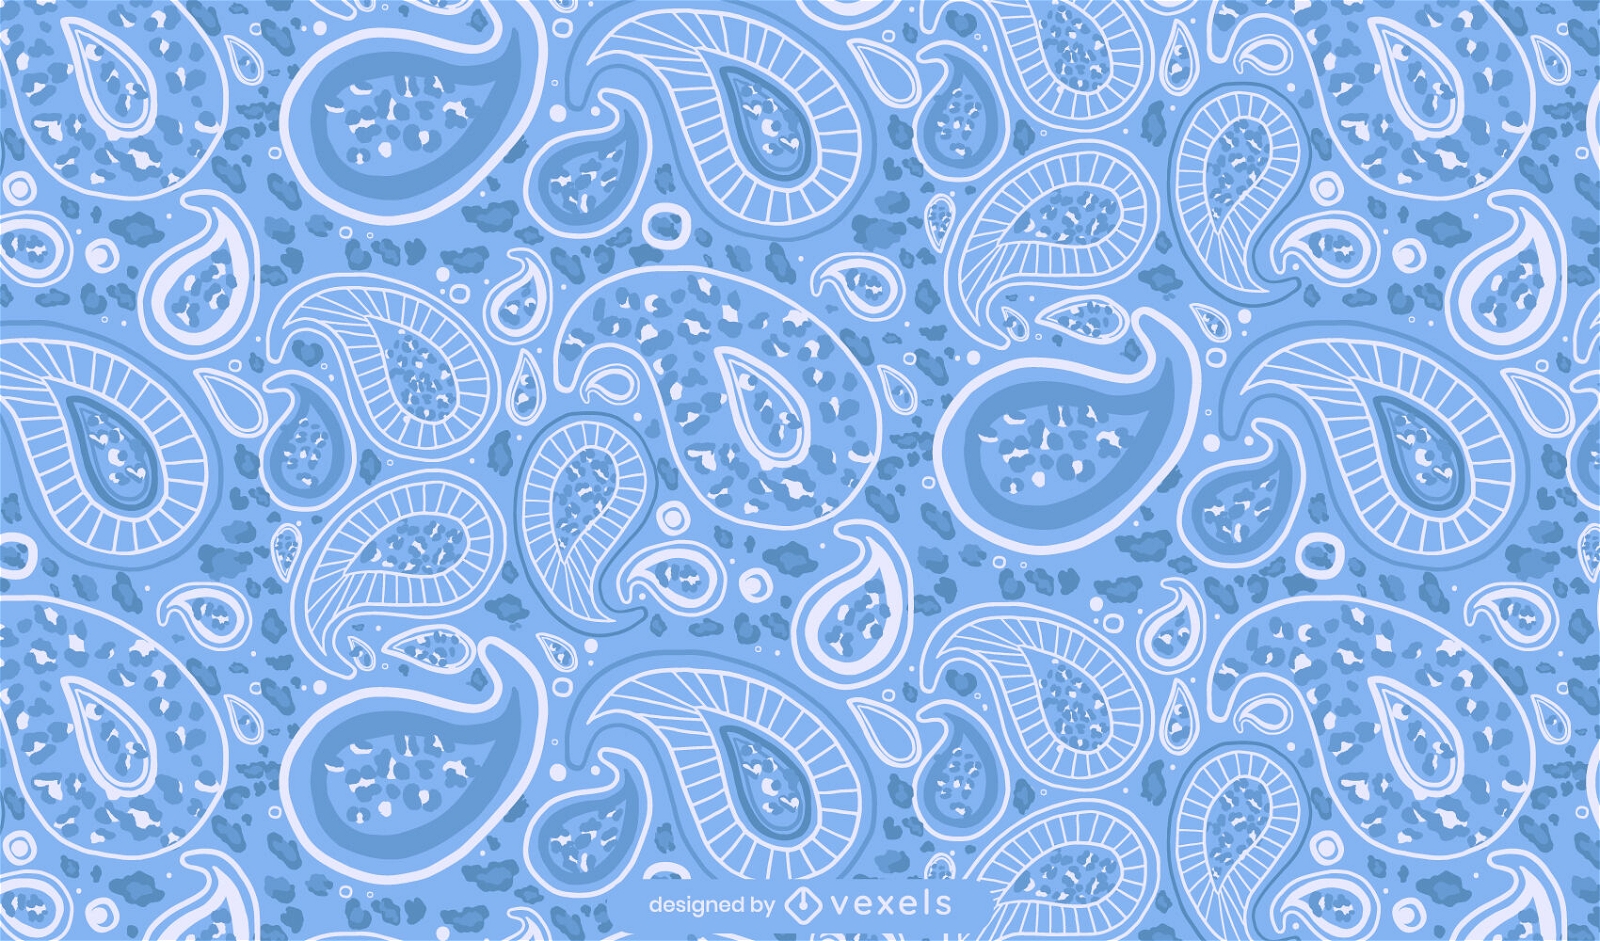 Paisley Vector & Graphics to Download